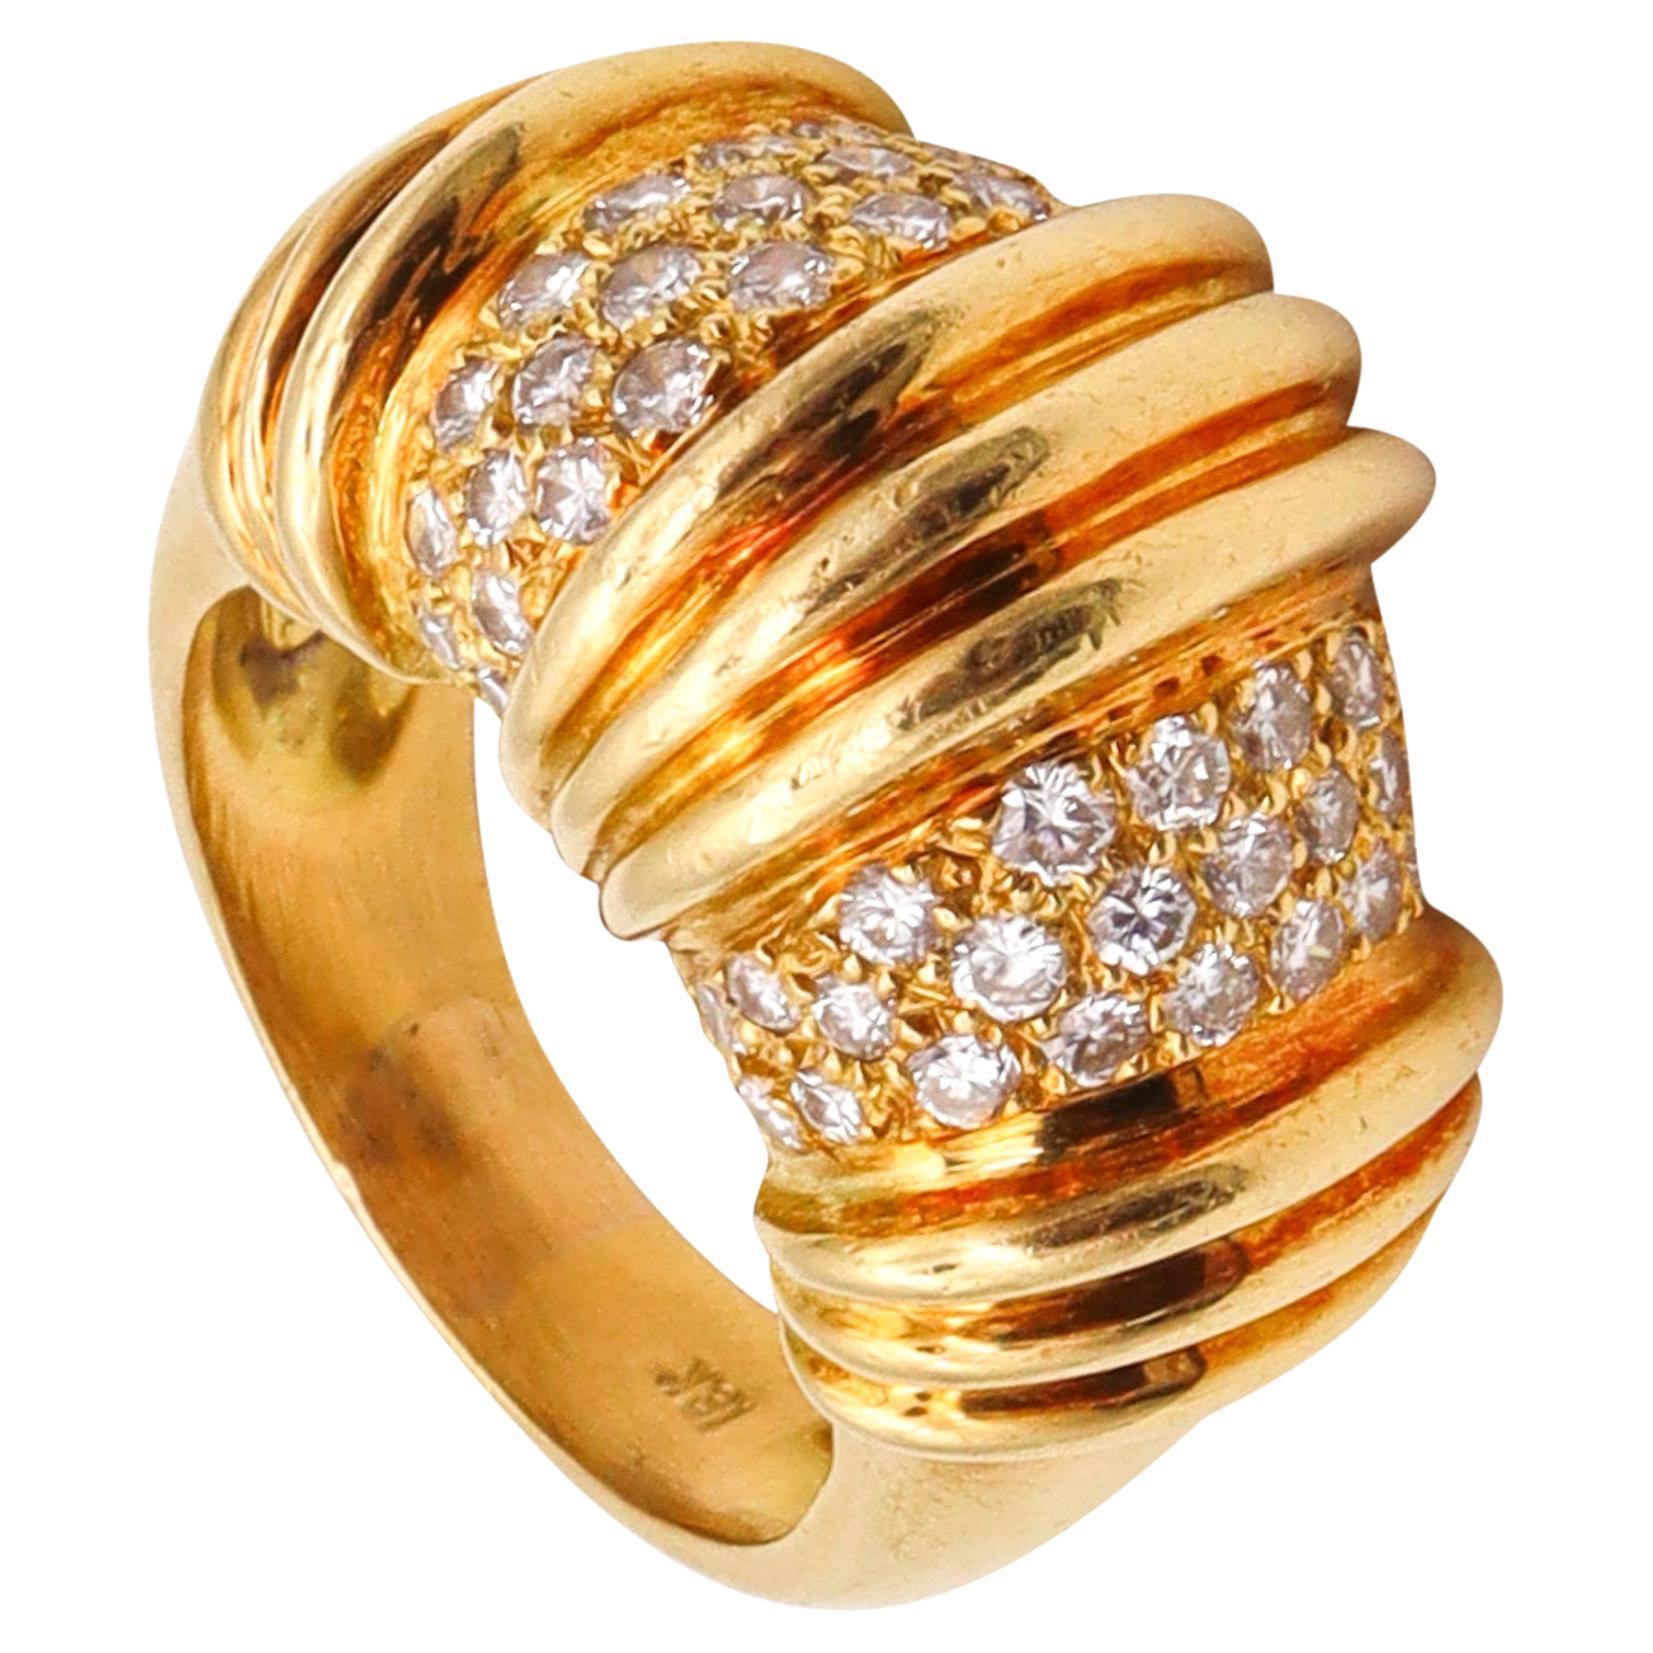 Charles Krypell Modernist Cocktail Ring In 18Kt Gold With 1.08 Cts In Diamonds